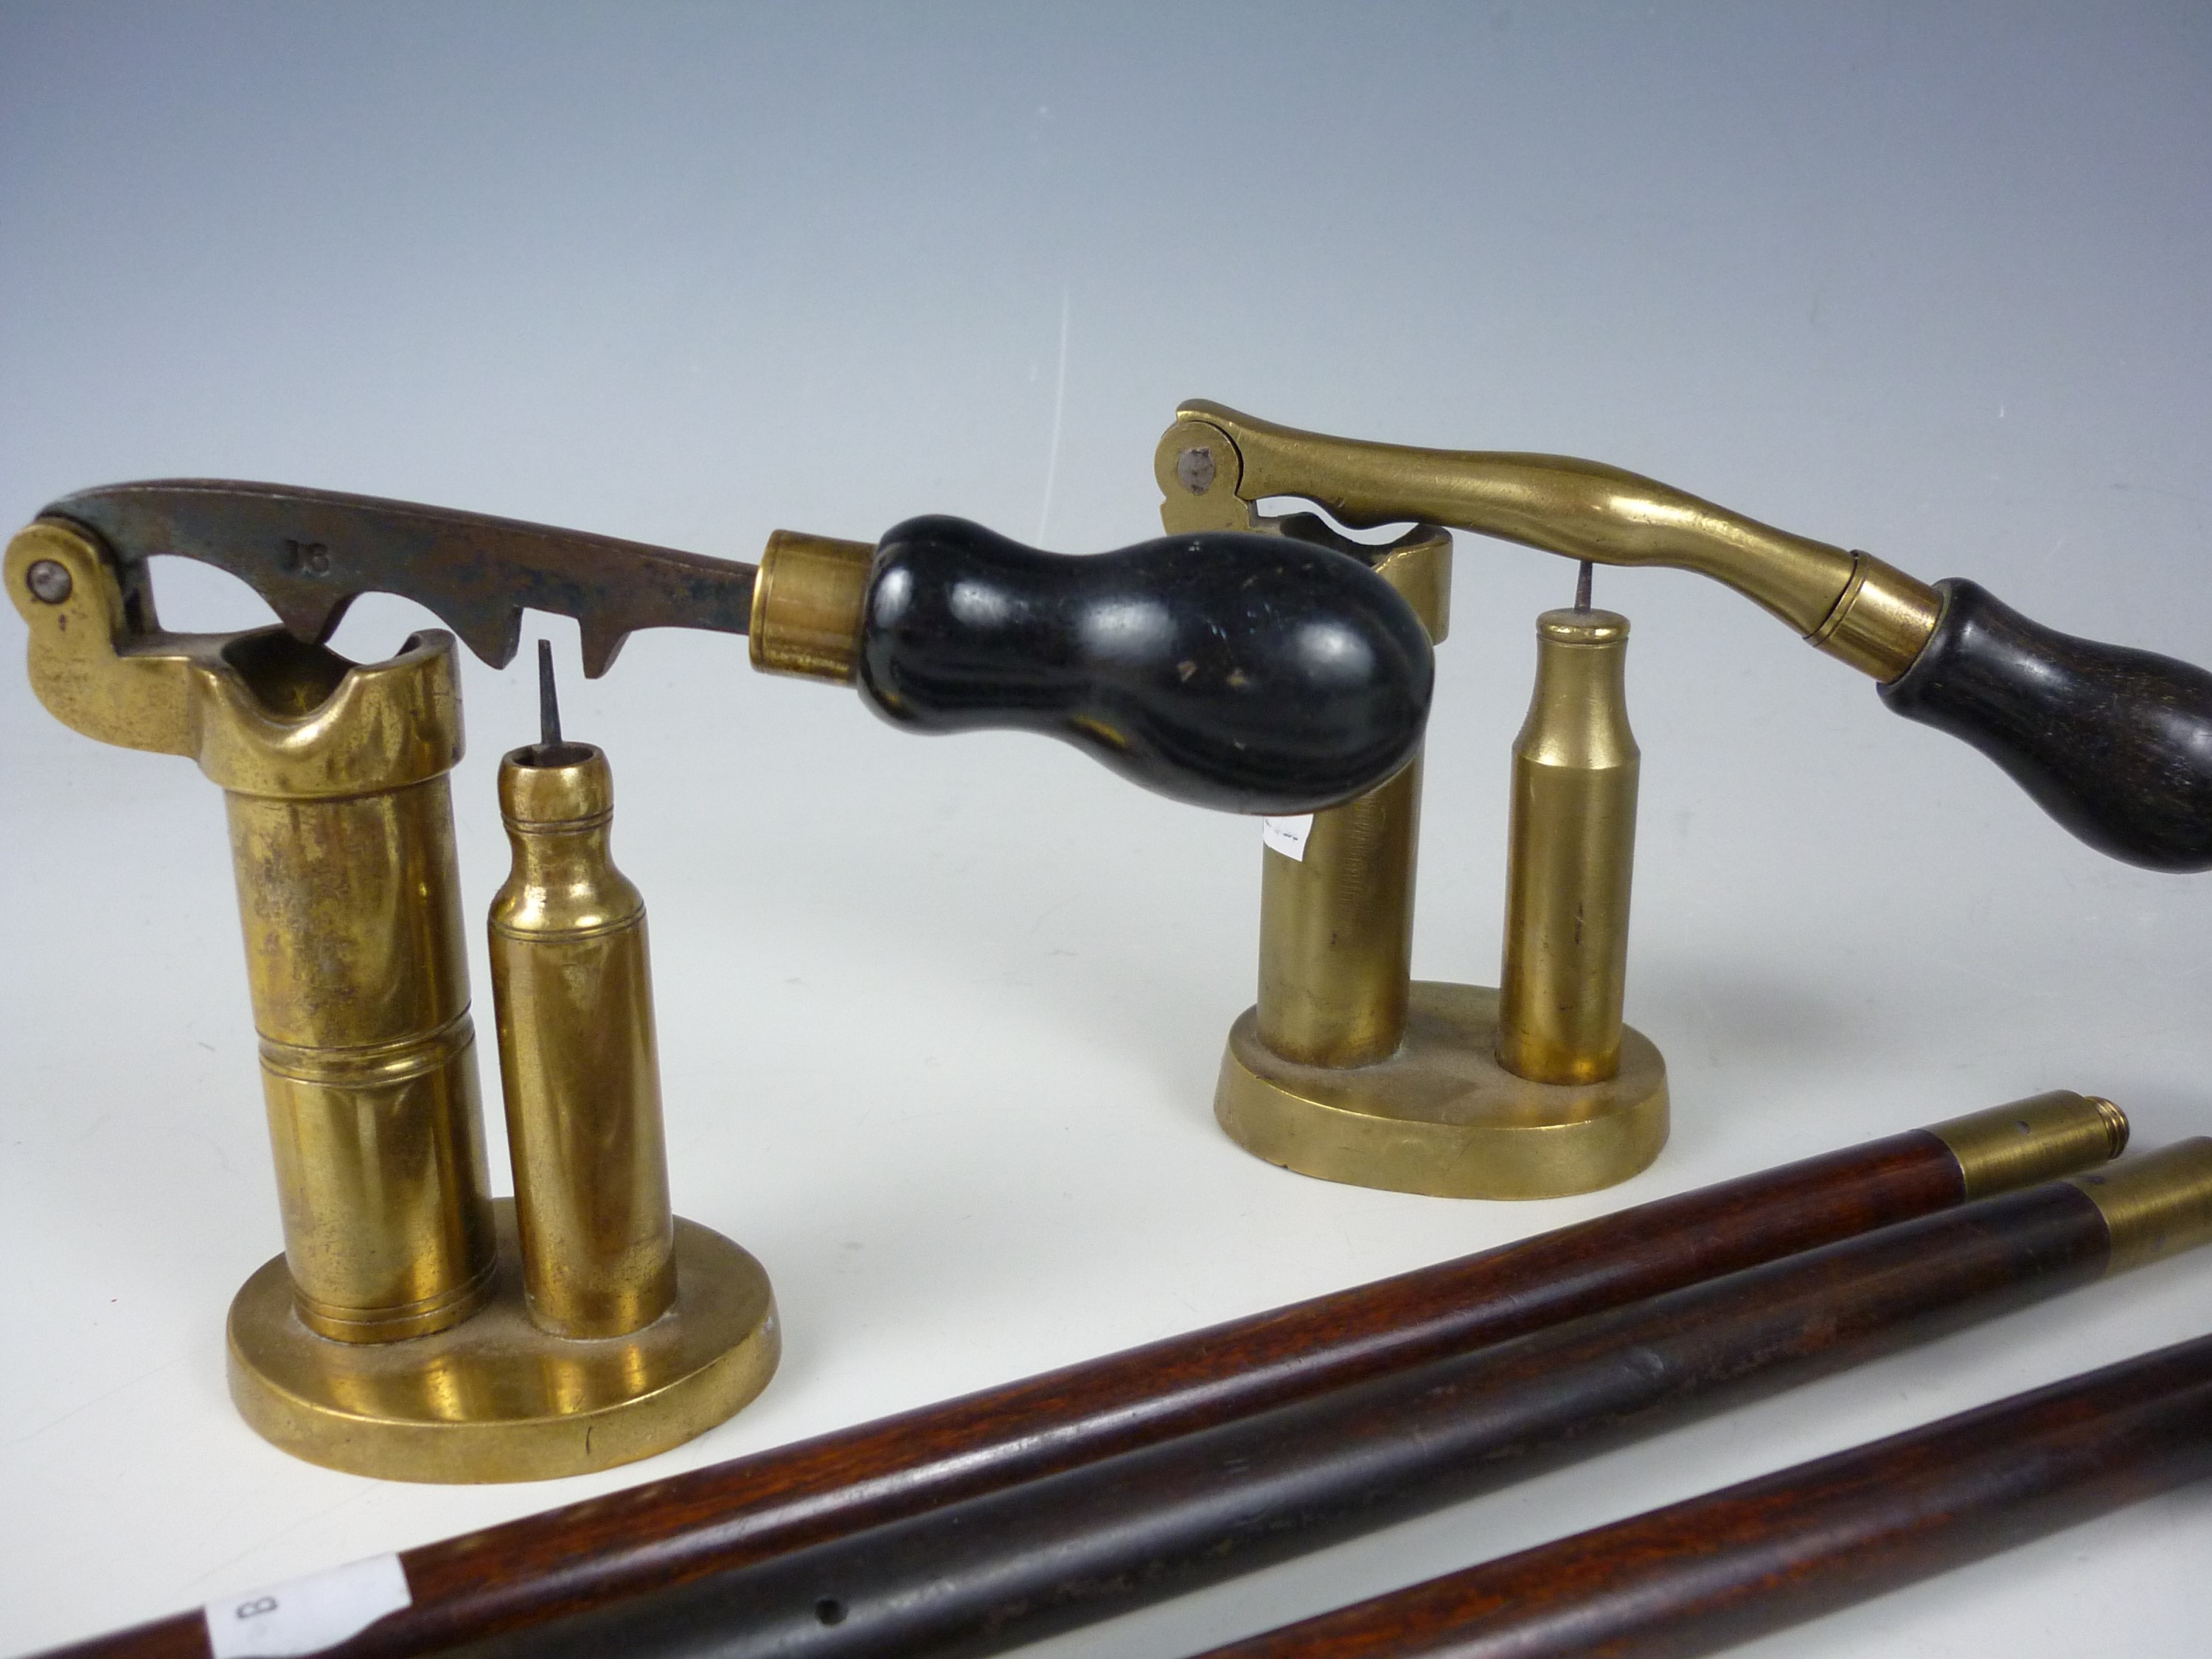 A group of late 19th Century gun tools including cartridge makers, a powder measure and barrel - Image 2 of 3